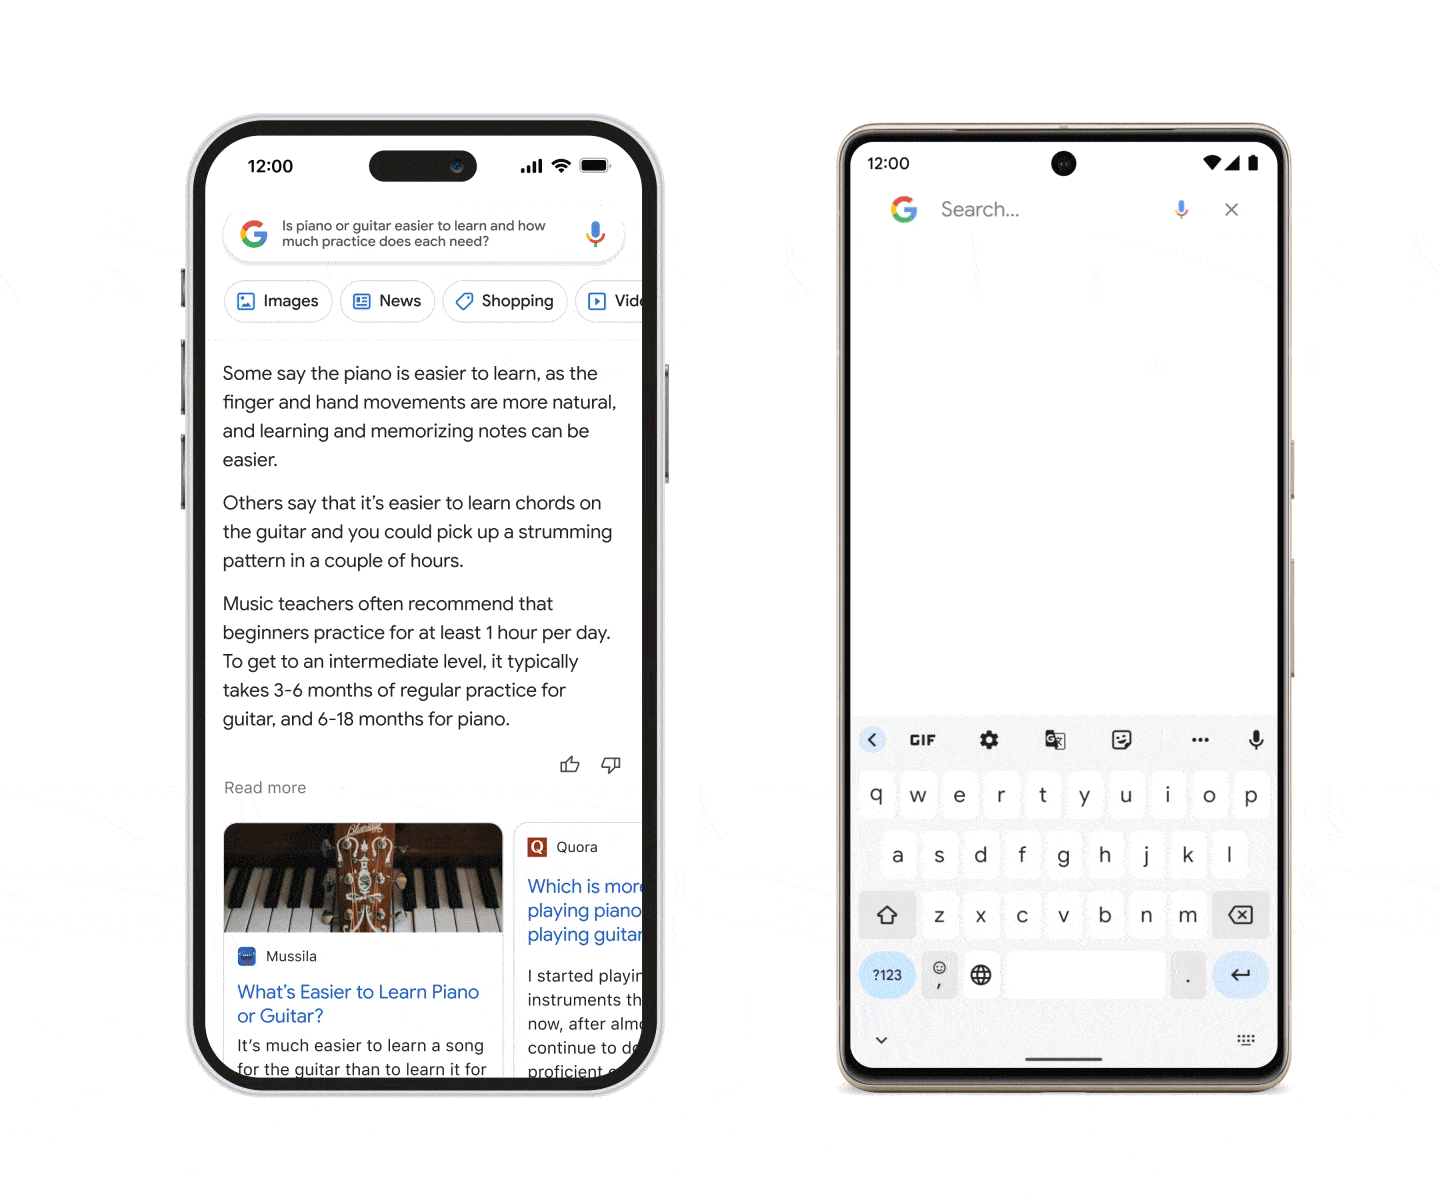 Example of Google's Search AI